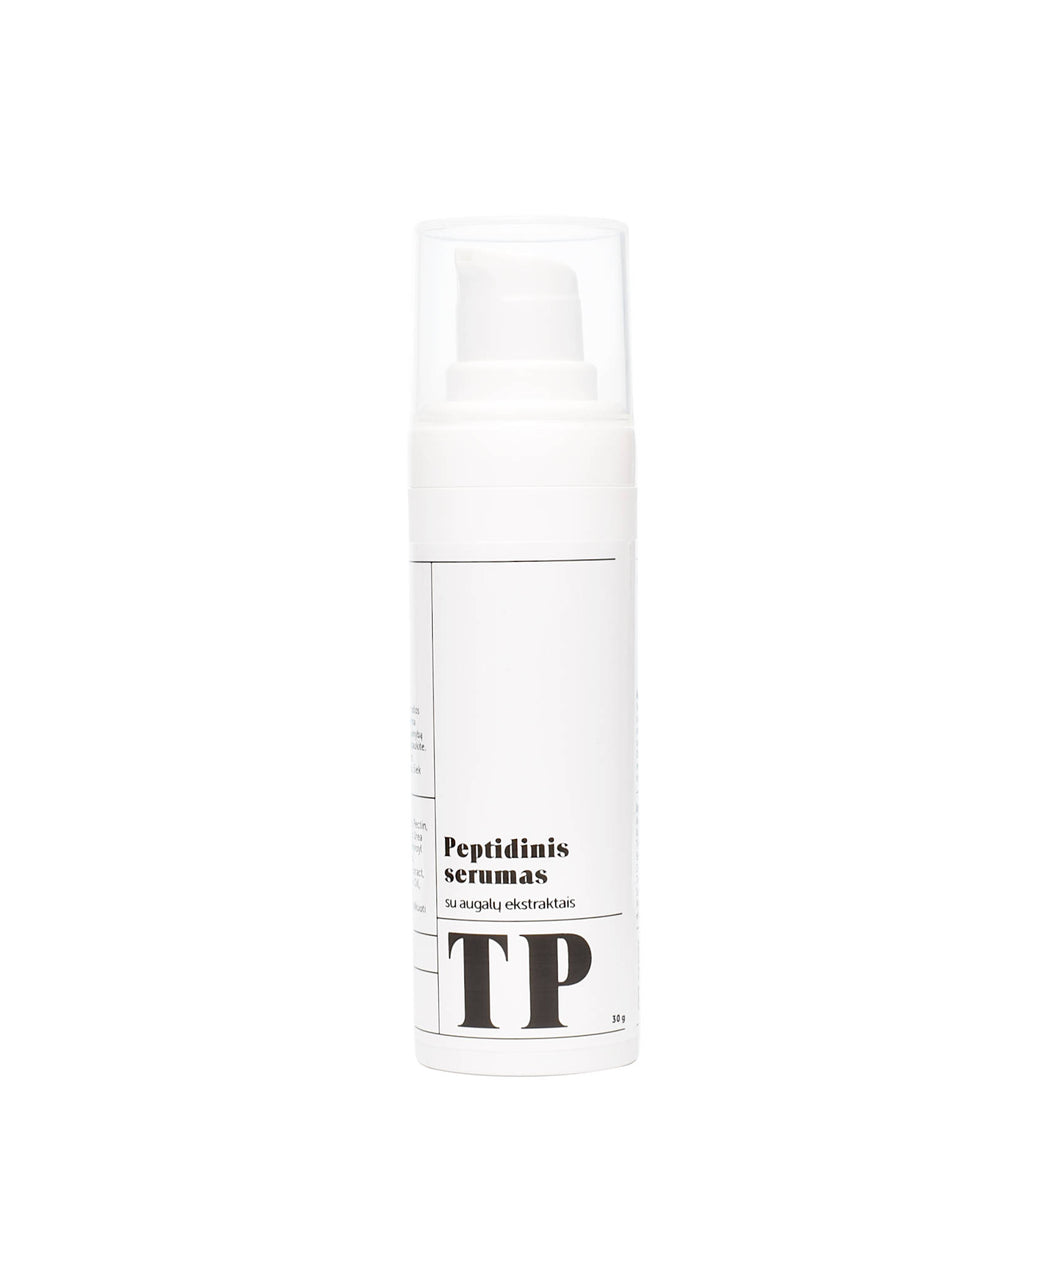 Peptide serum with plant extracts, 30g